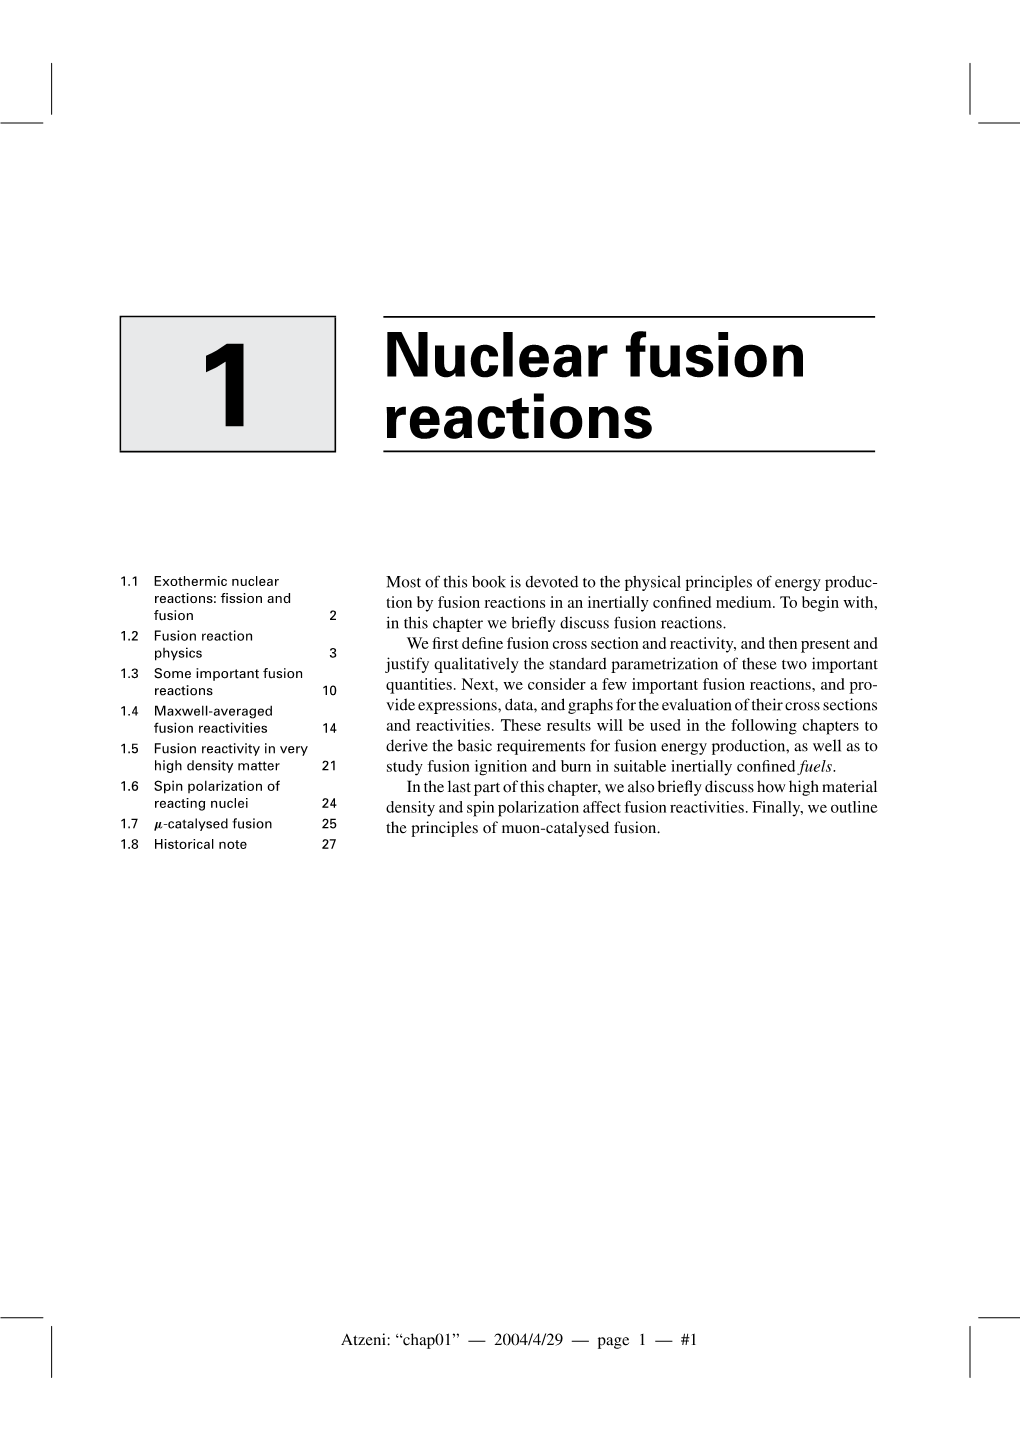 Nuclear Fusion Reactions of Interest to Controlled Energy Production Had Been Established